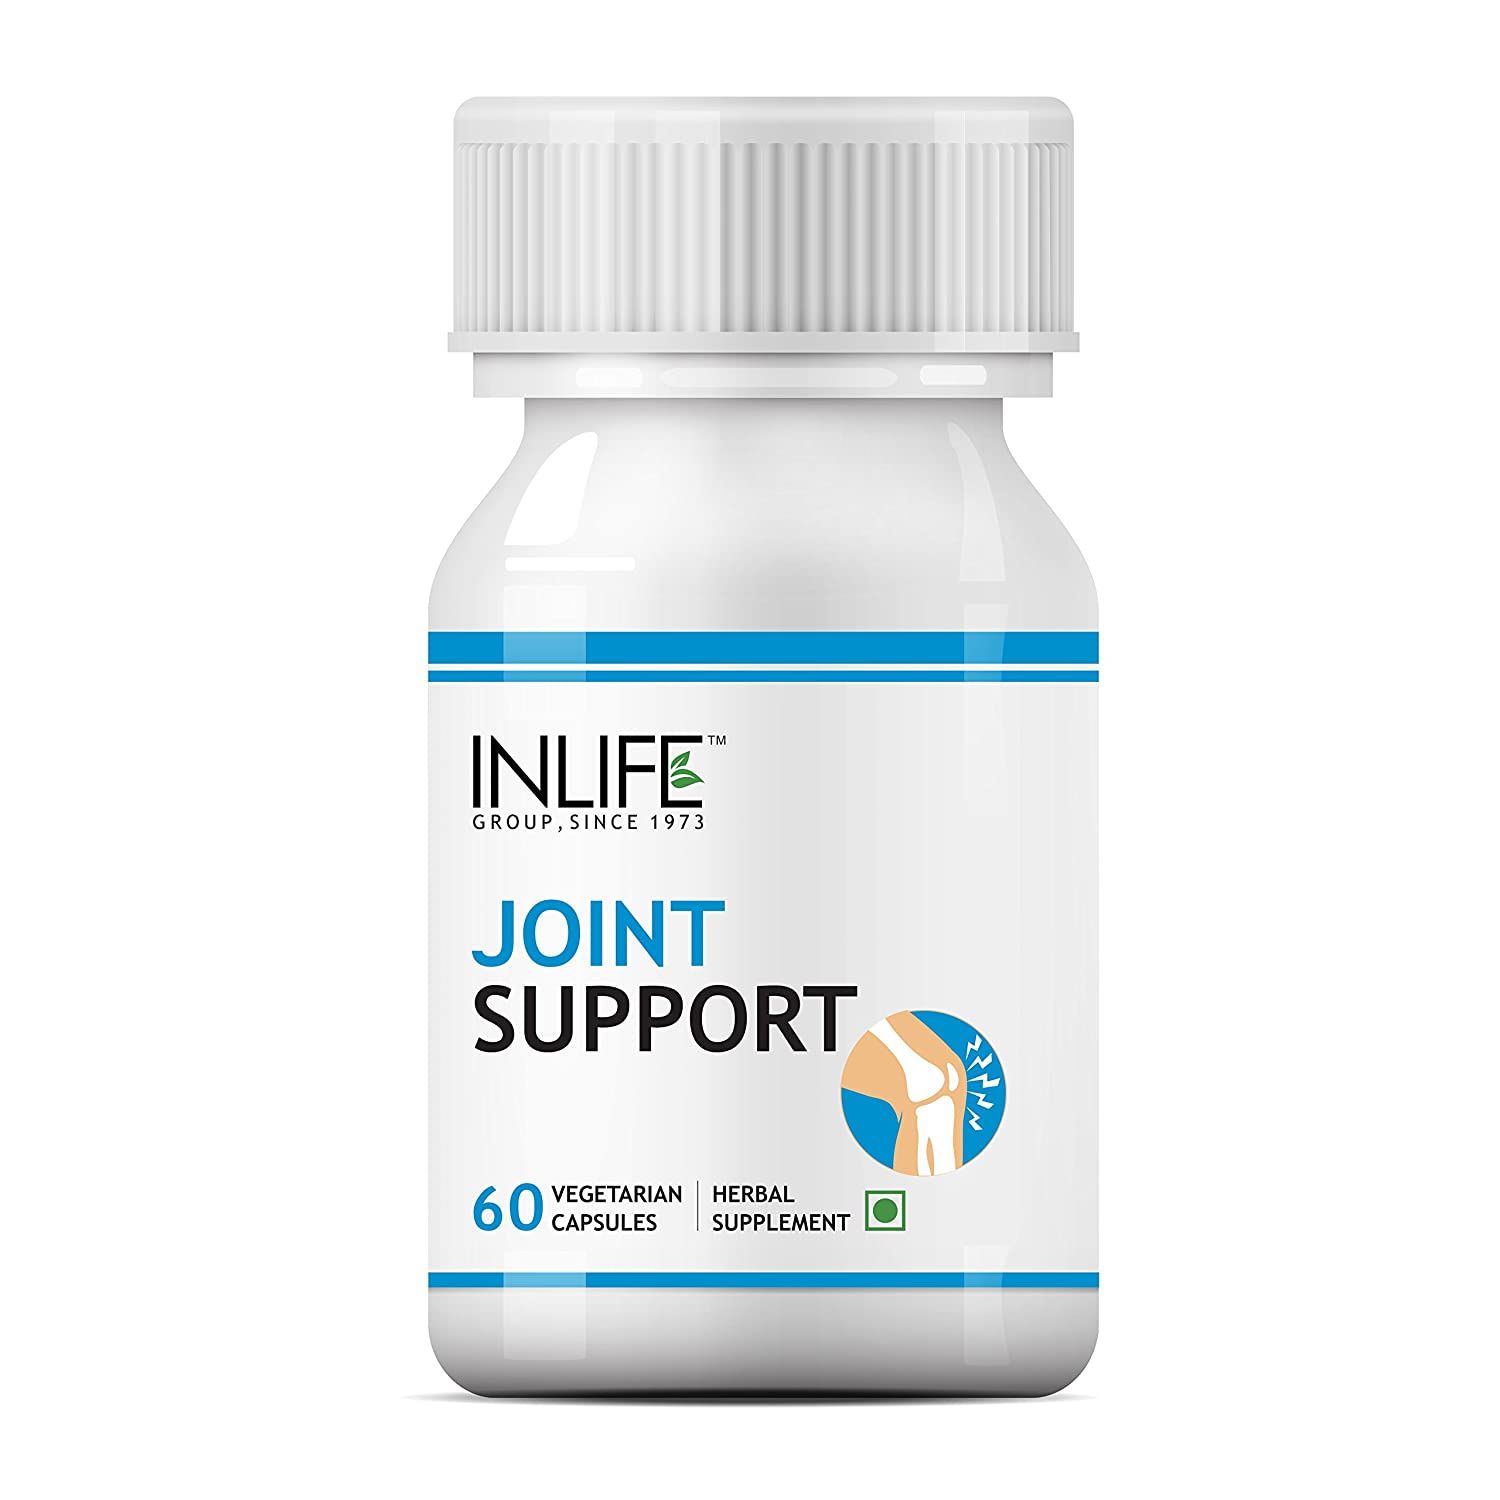 Inlife Joint Support Capsules Image